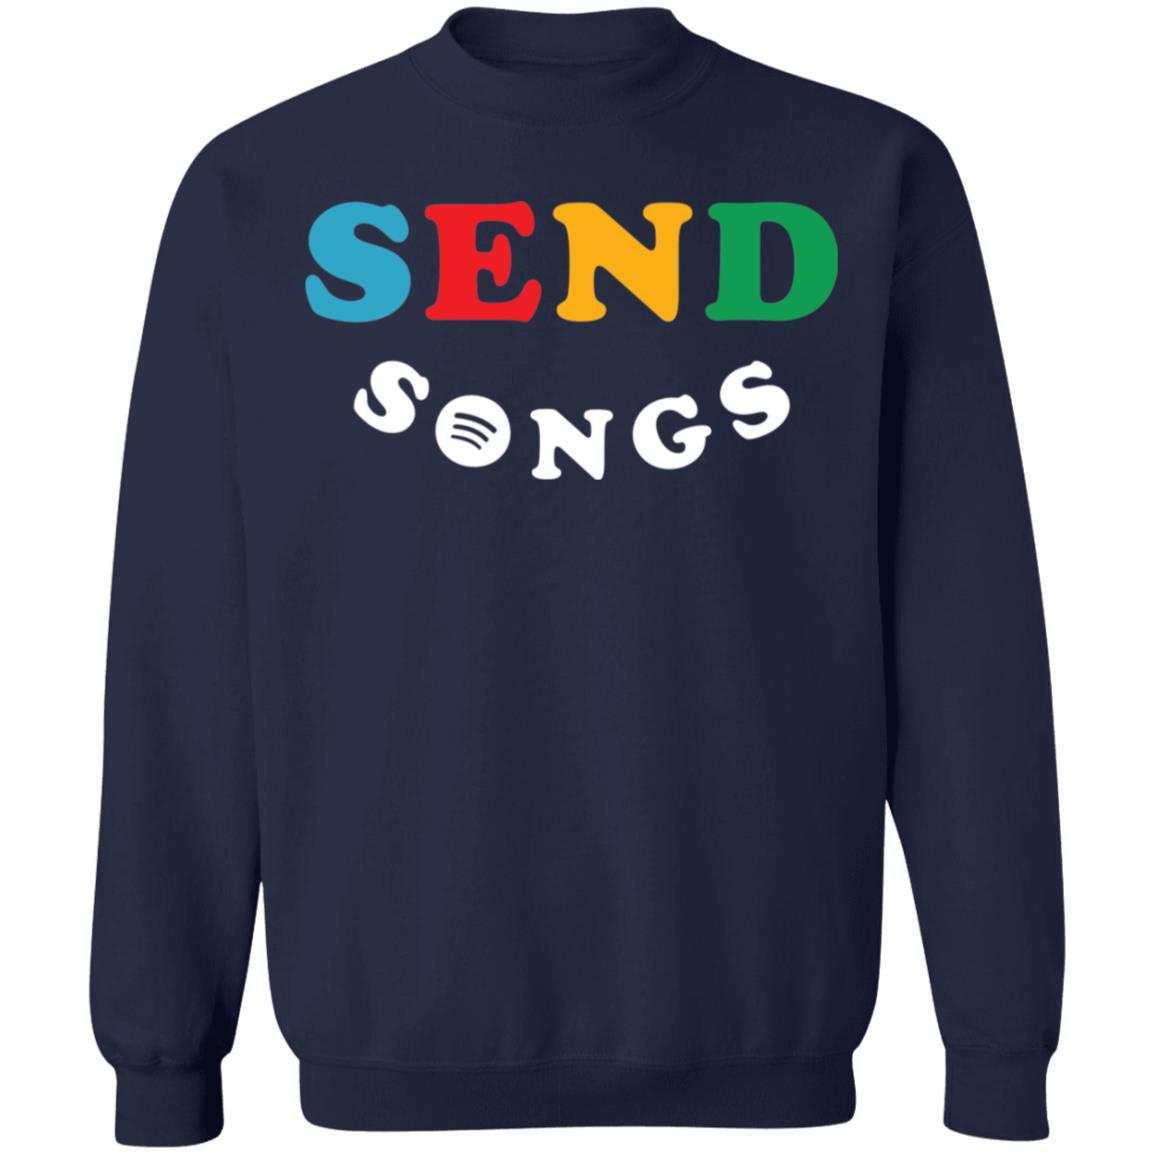 how to send a song